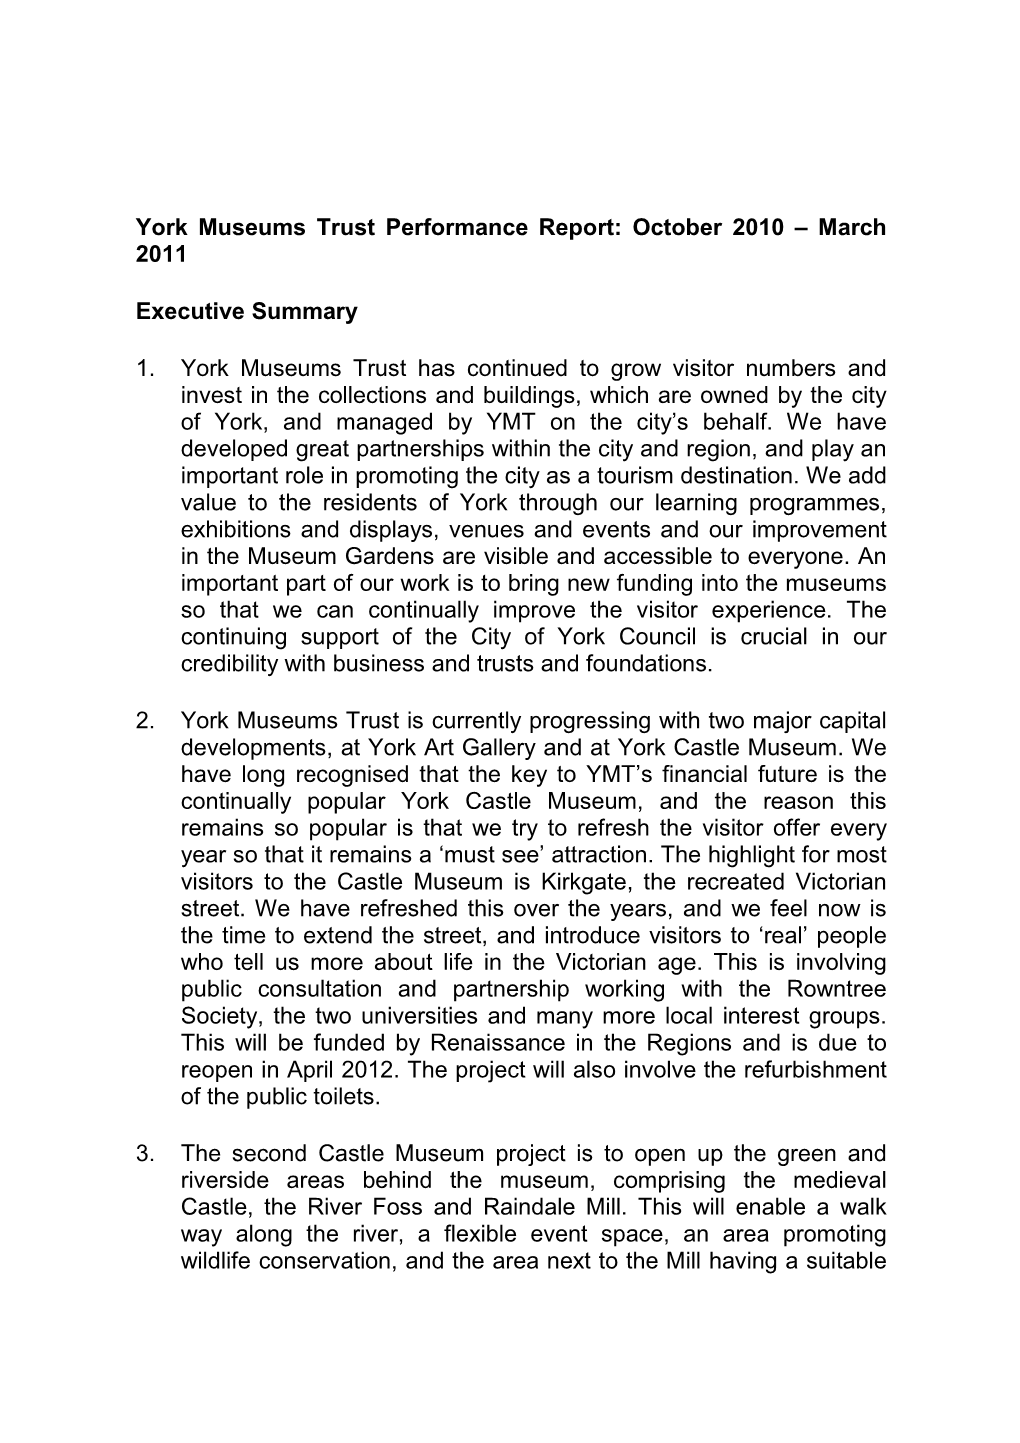 York Museums Trust Performance Report: October 2010 – March 2011